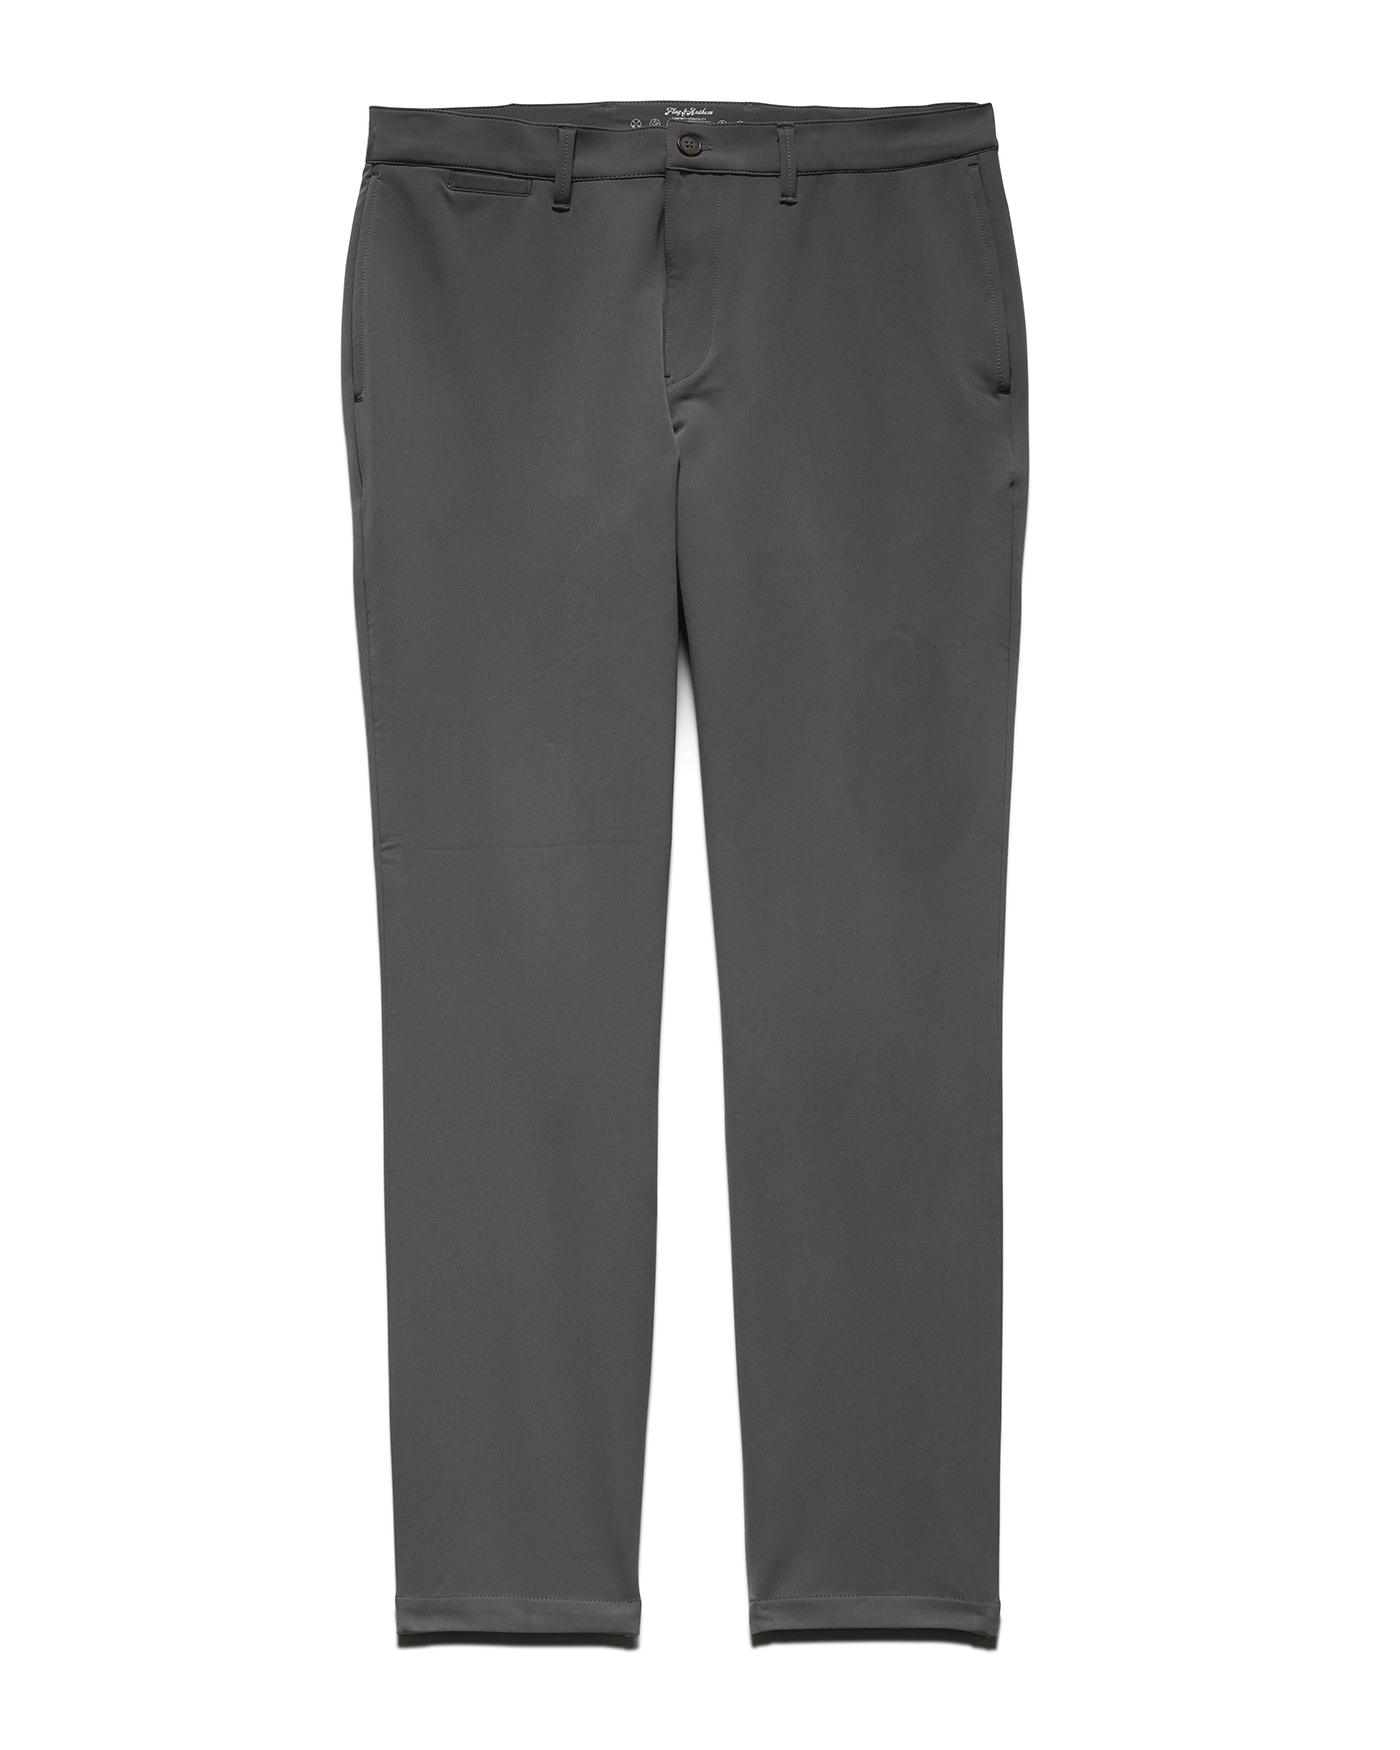 MID-WEIGHT ANY-WEAR PERFORMANCE PANT - NASHVILLE STRAIGHT